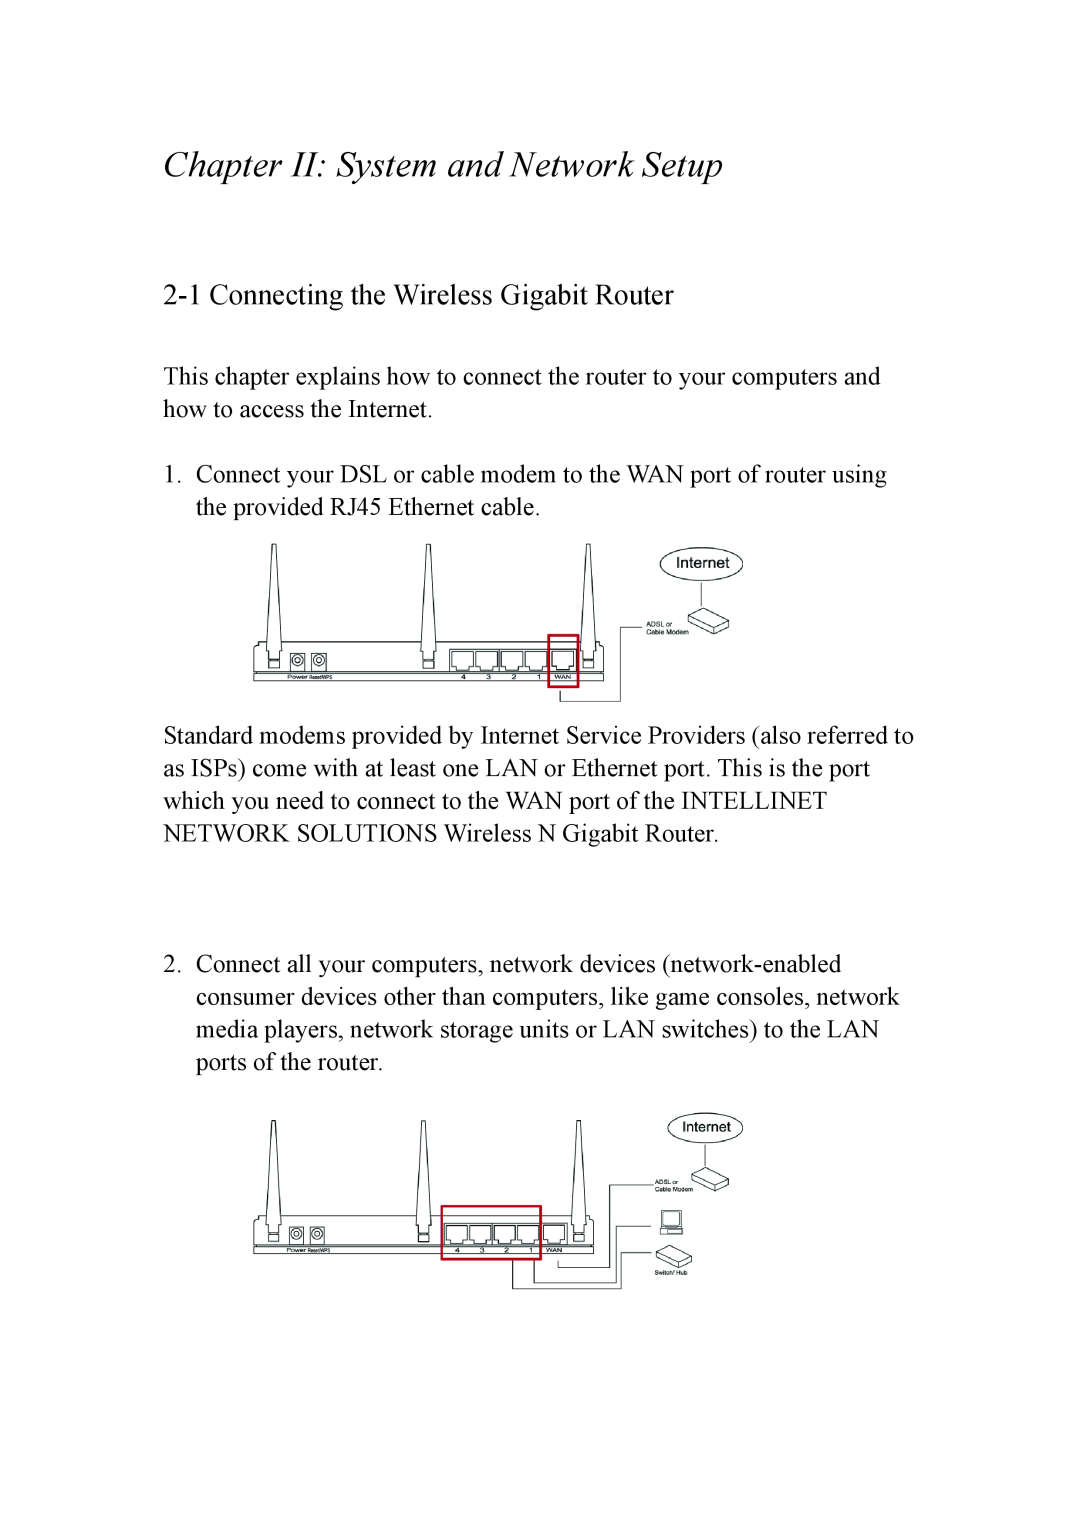 Intellinet Network Solutions INT-524315-UM-0808-1 user manual Chapter II System and Network Setup 